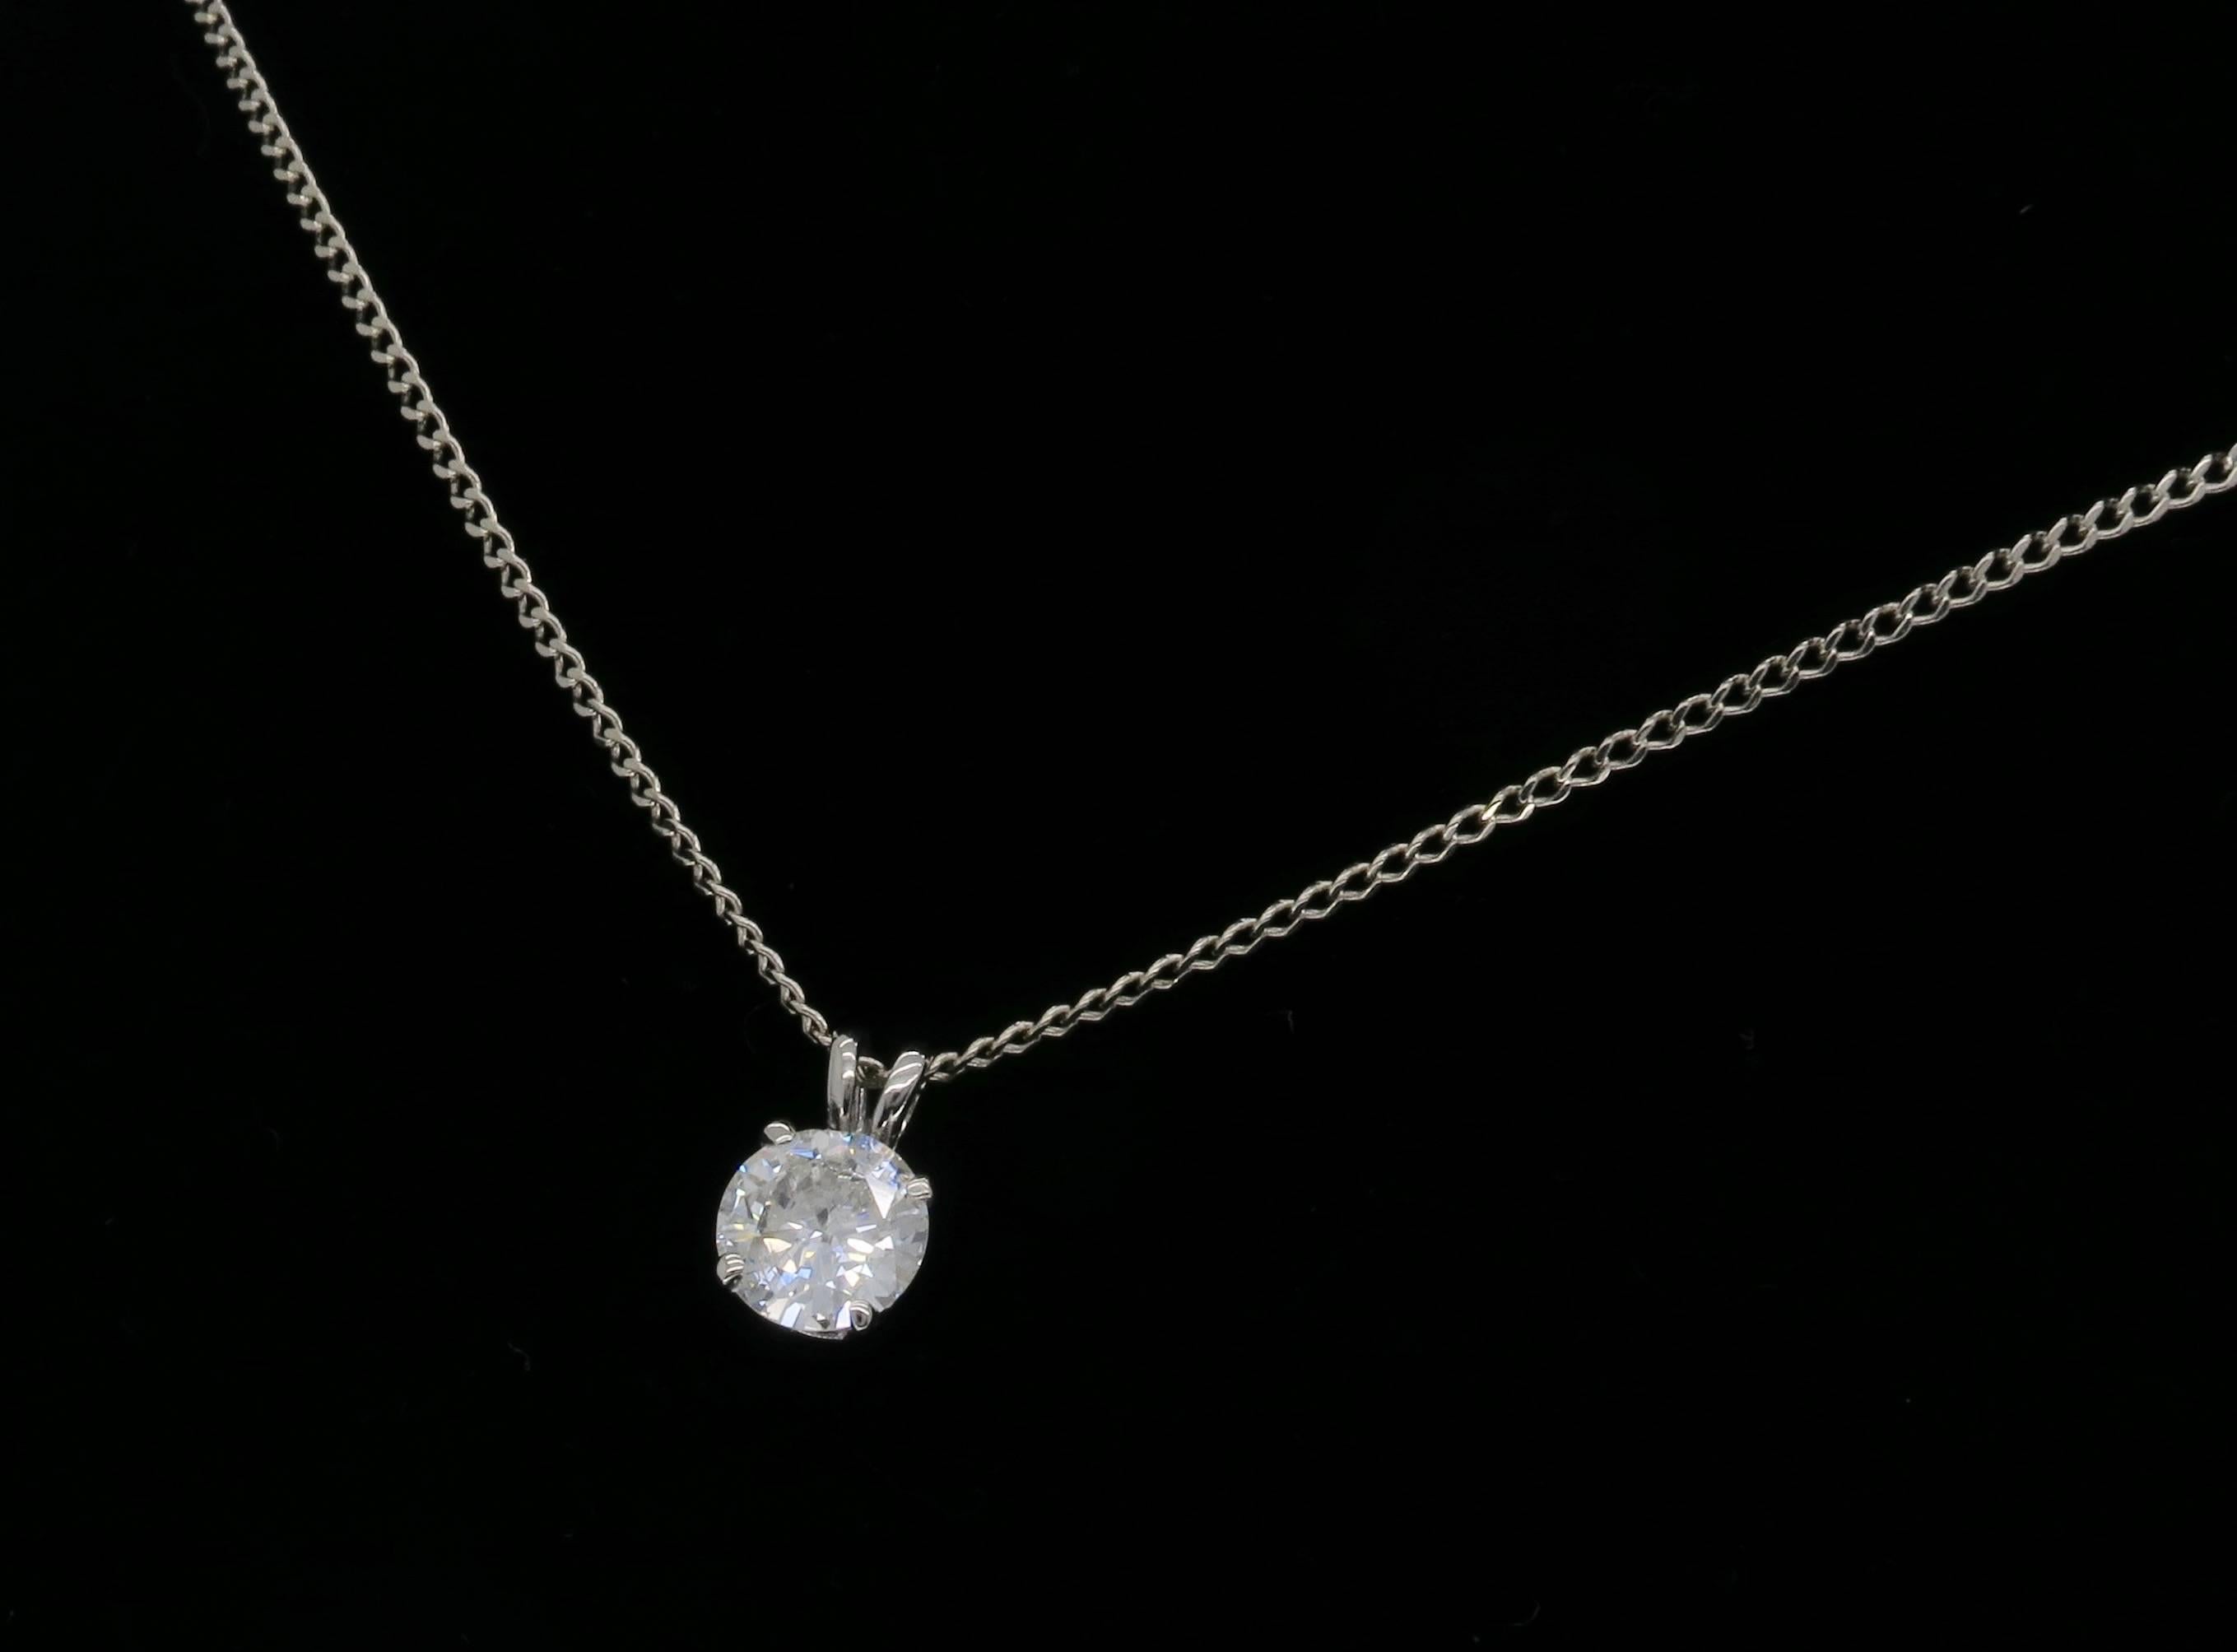 This pendant features a 1.11CT Round Brilliant Cut Diamond. The diamond has J-K color and I1 clarity. The 14K gold necklace is 19" long and weighs 3.2 grams.